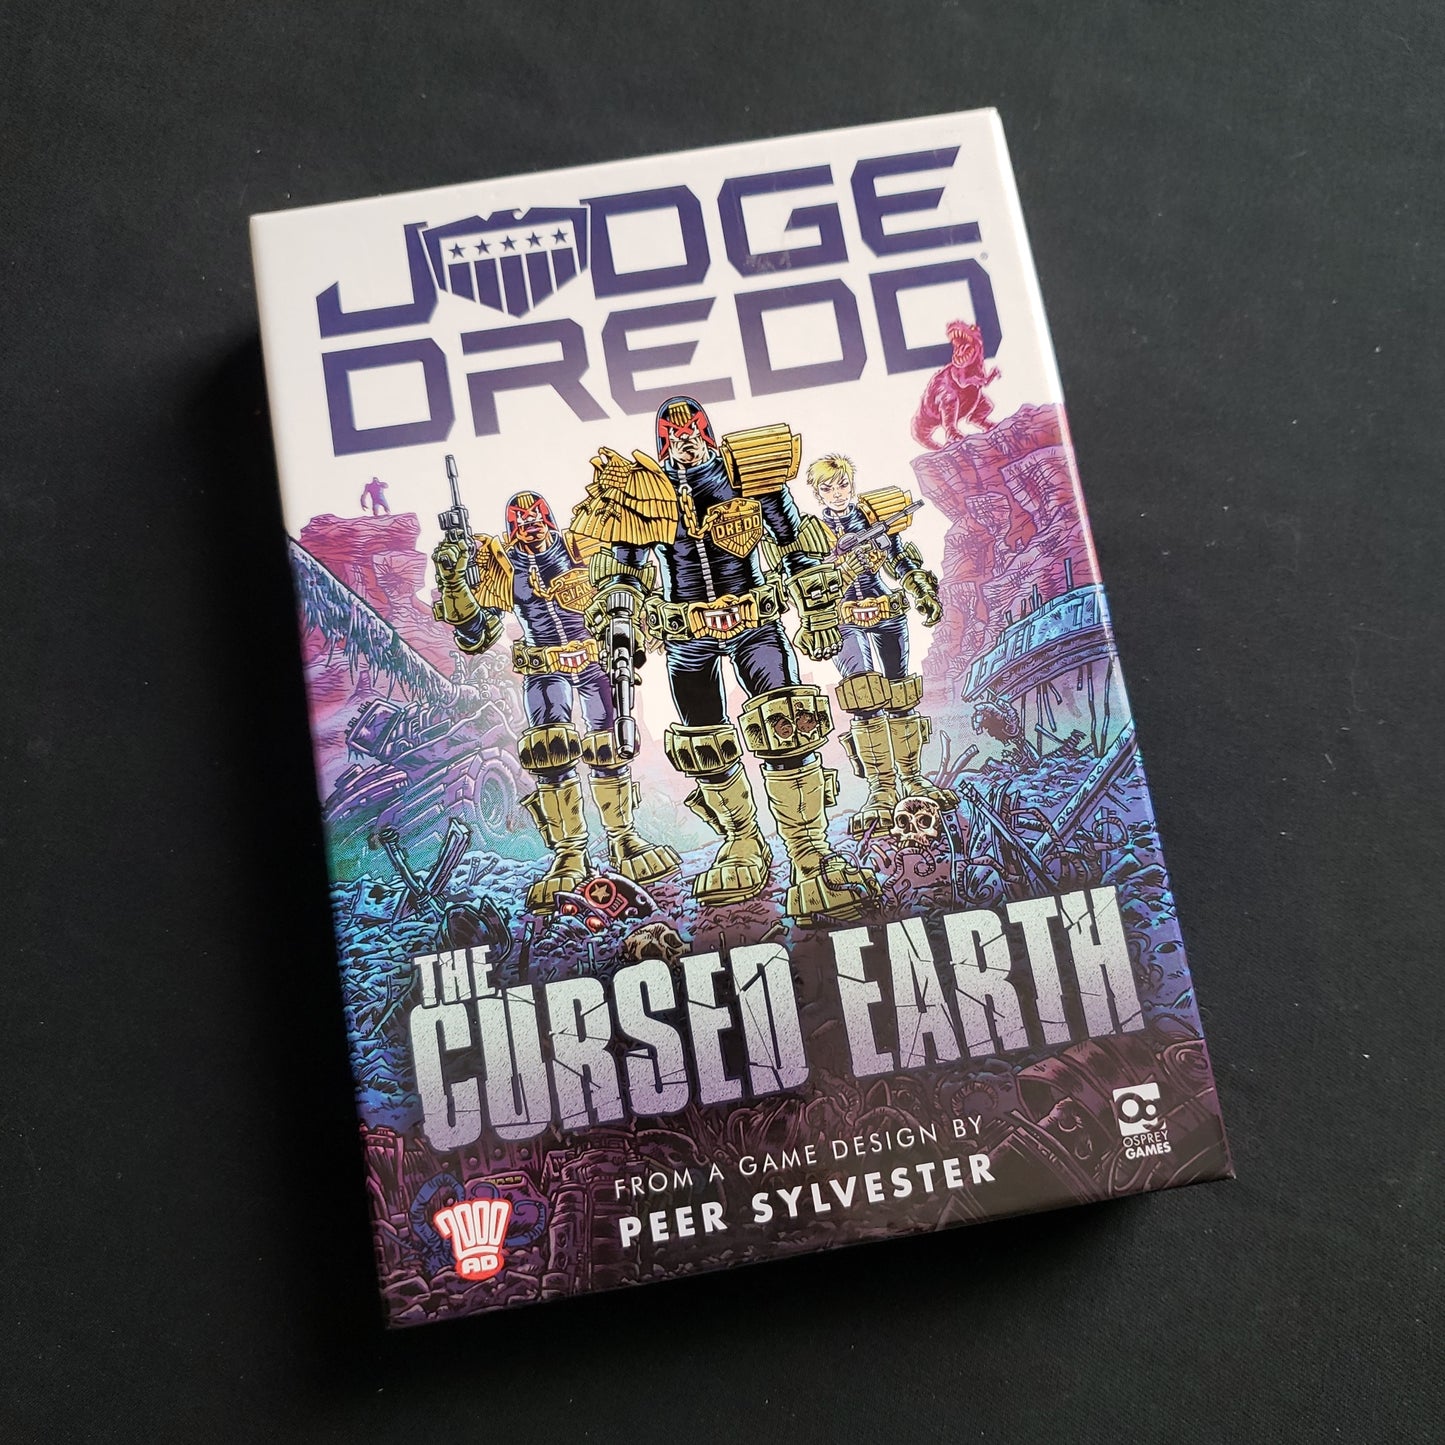 Image shows the front cover of the box of the Judge Dredd: The Cursed Earth card game